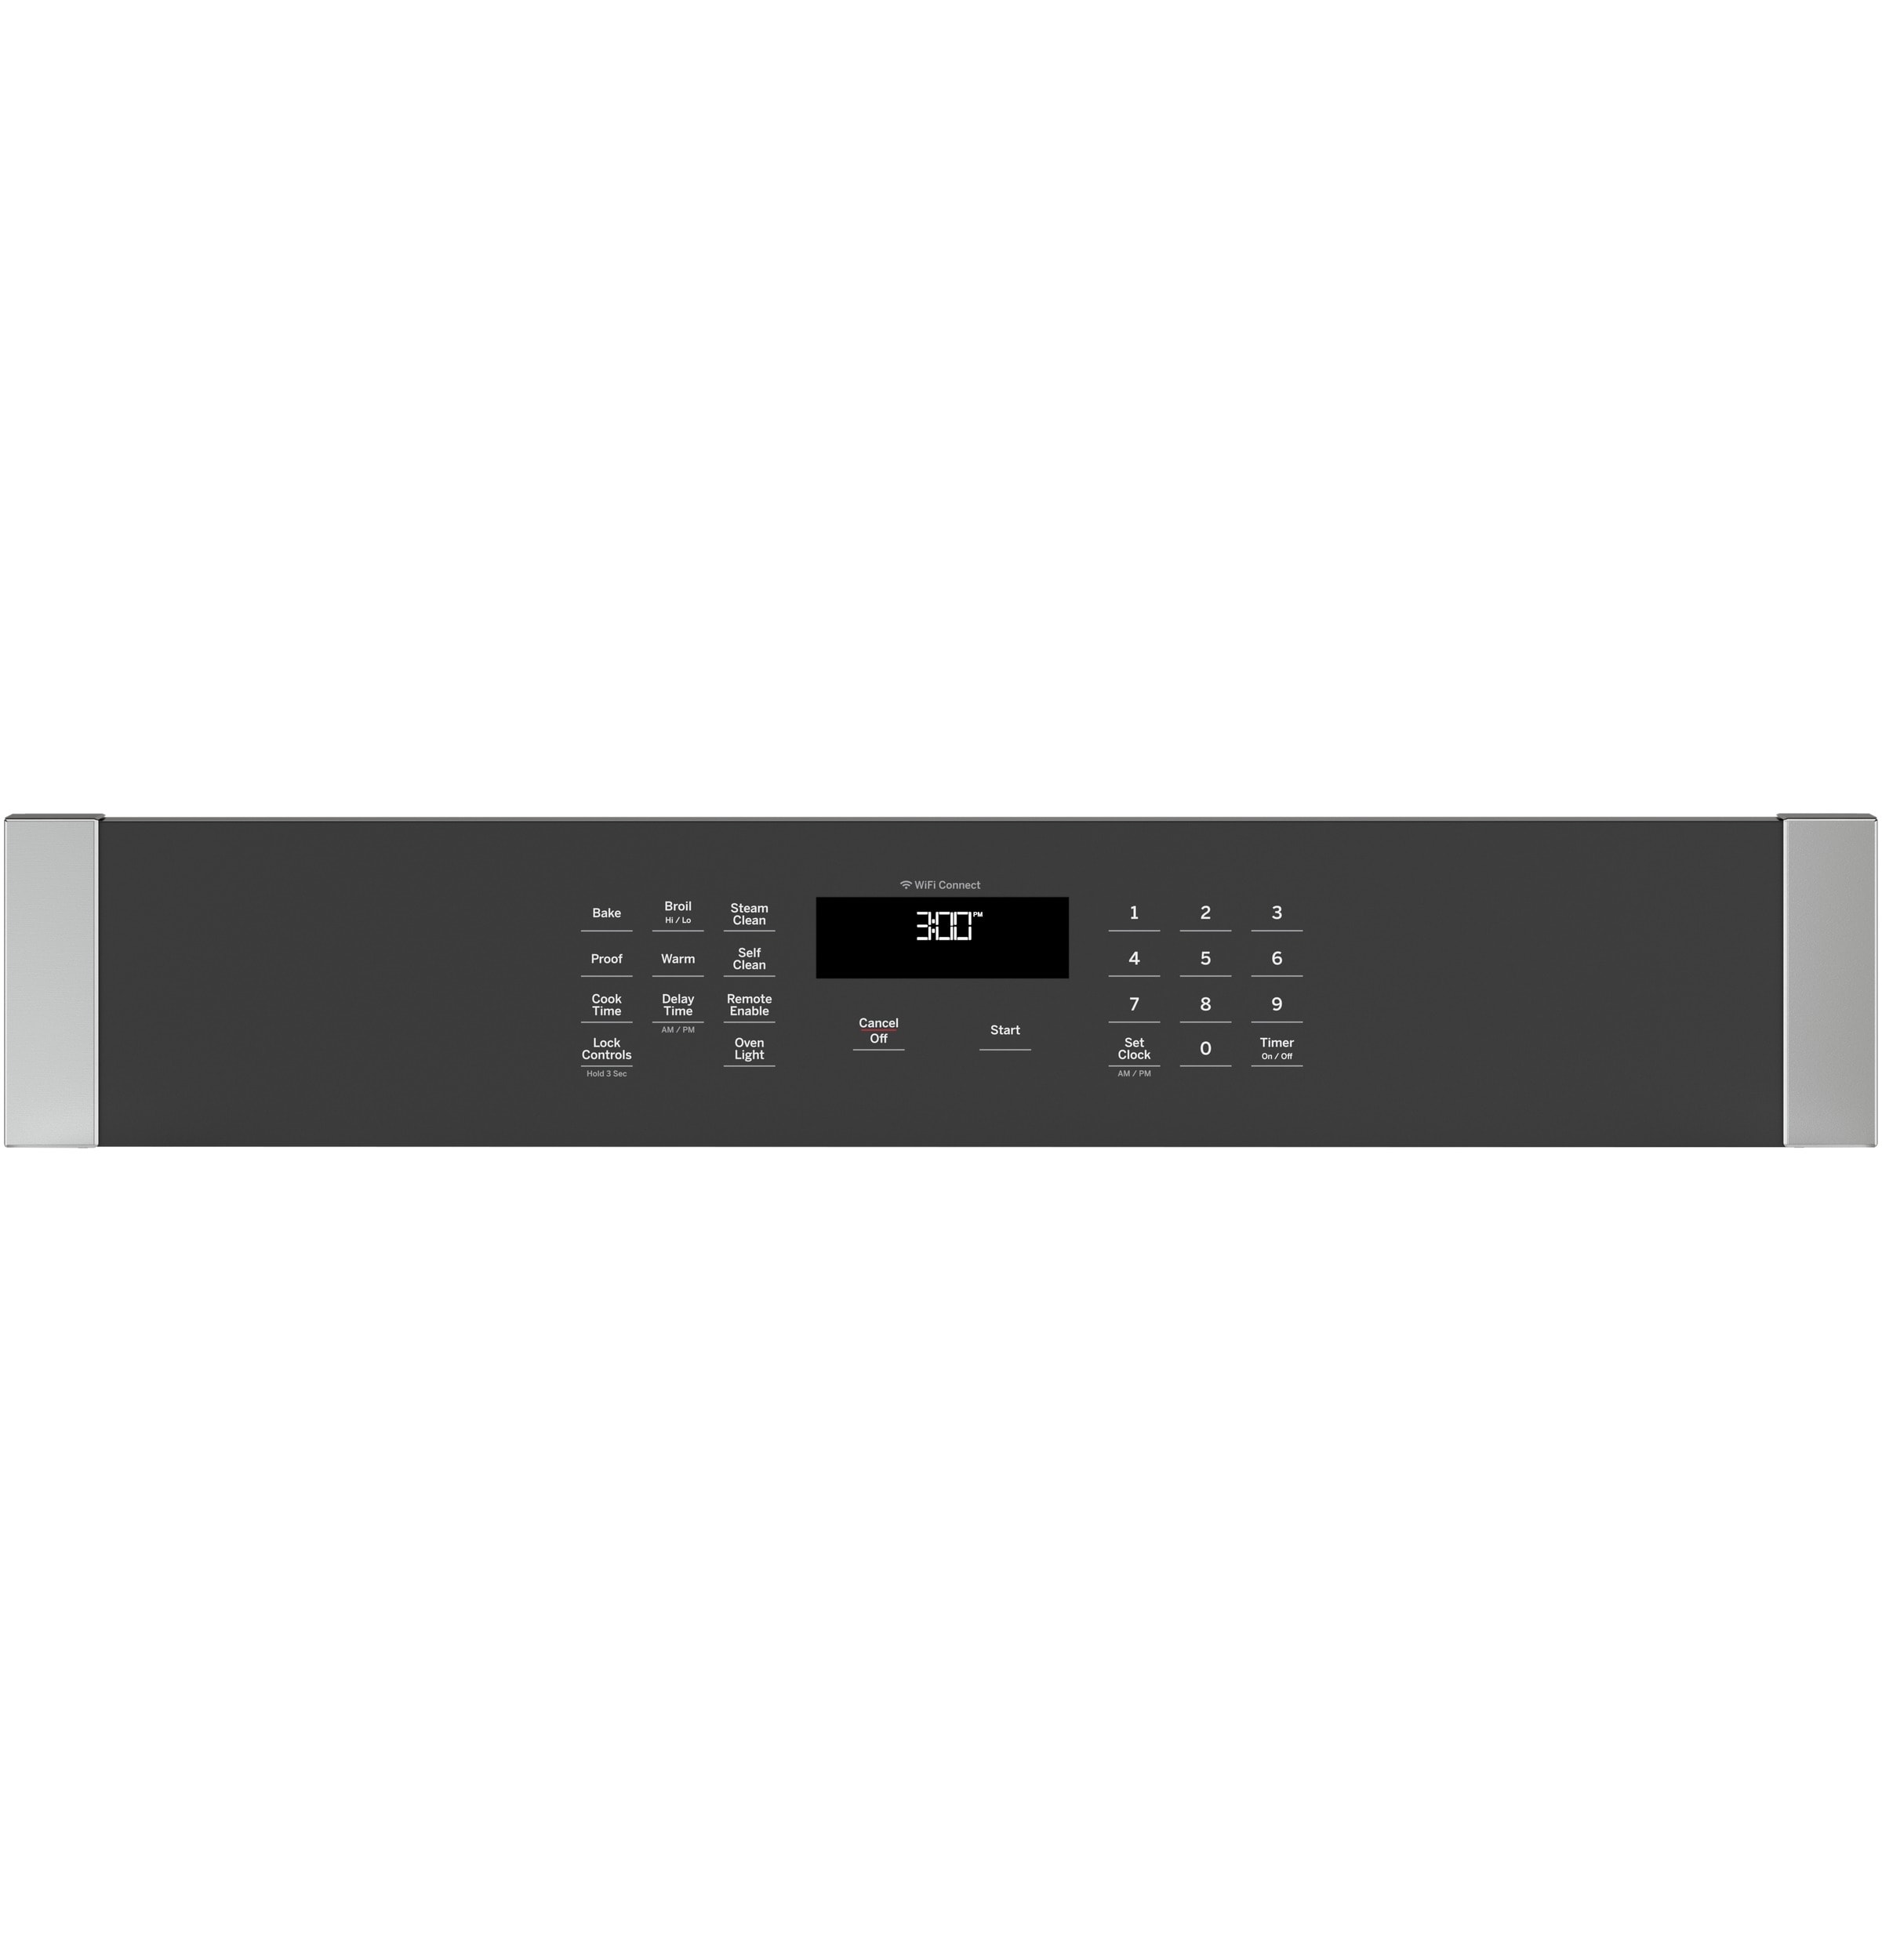 30 Built-In Single Convection Oven, E Series – reece-bath-and-kitchen